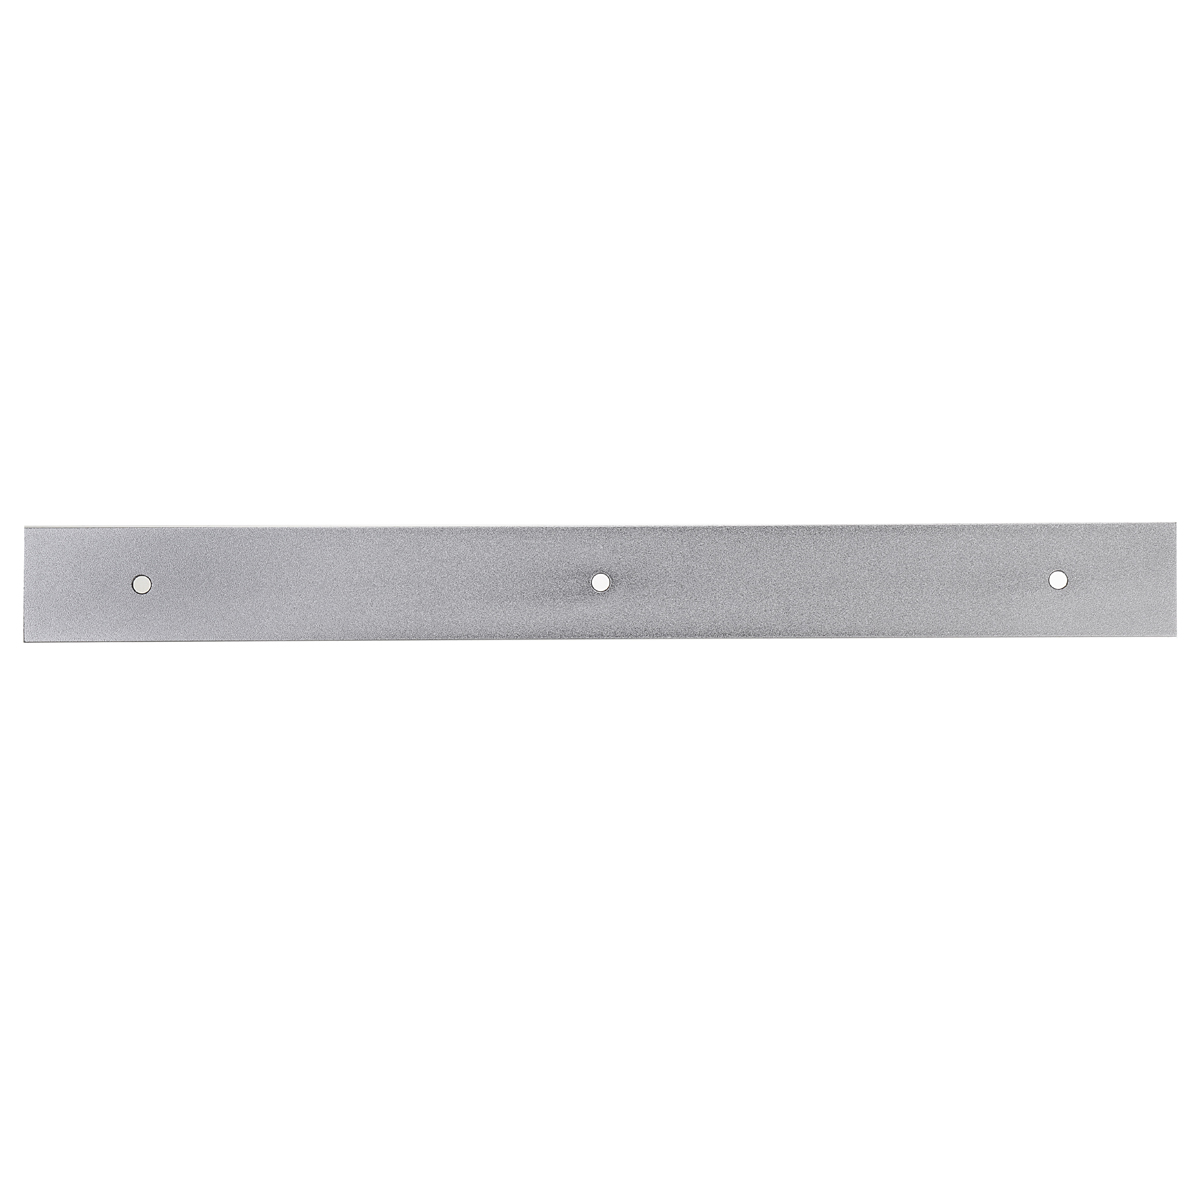 300mm-to-1220mm-Grey-T-Track-with-Predrilled-Mounting-Holes-30mm-x-128mm-Miter-Slot-for-Saw-Router-T-1810952-7